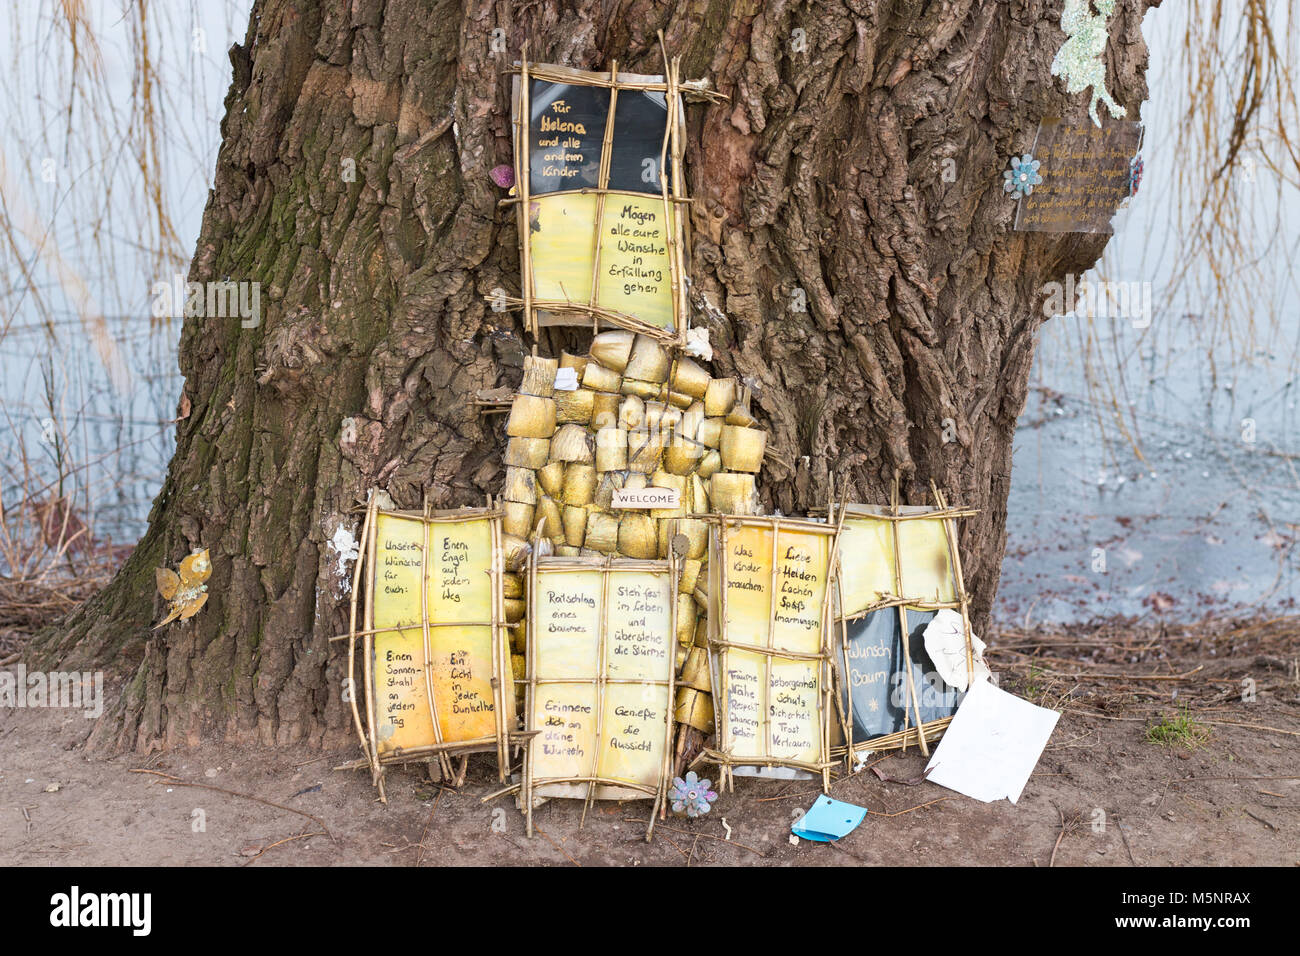 Magdeburg, Germany - February 25,2018: An old willow serves as a wish tree in the city park of Magdeburg. Stock Photo